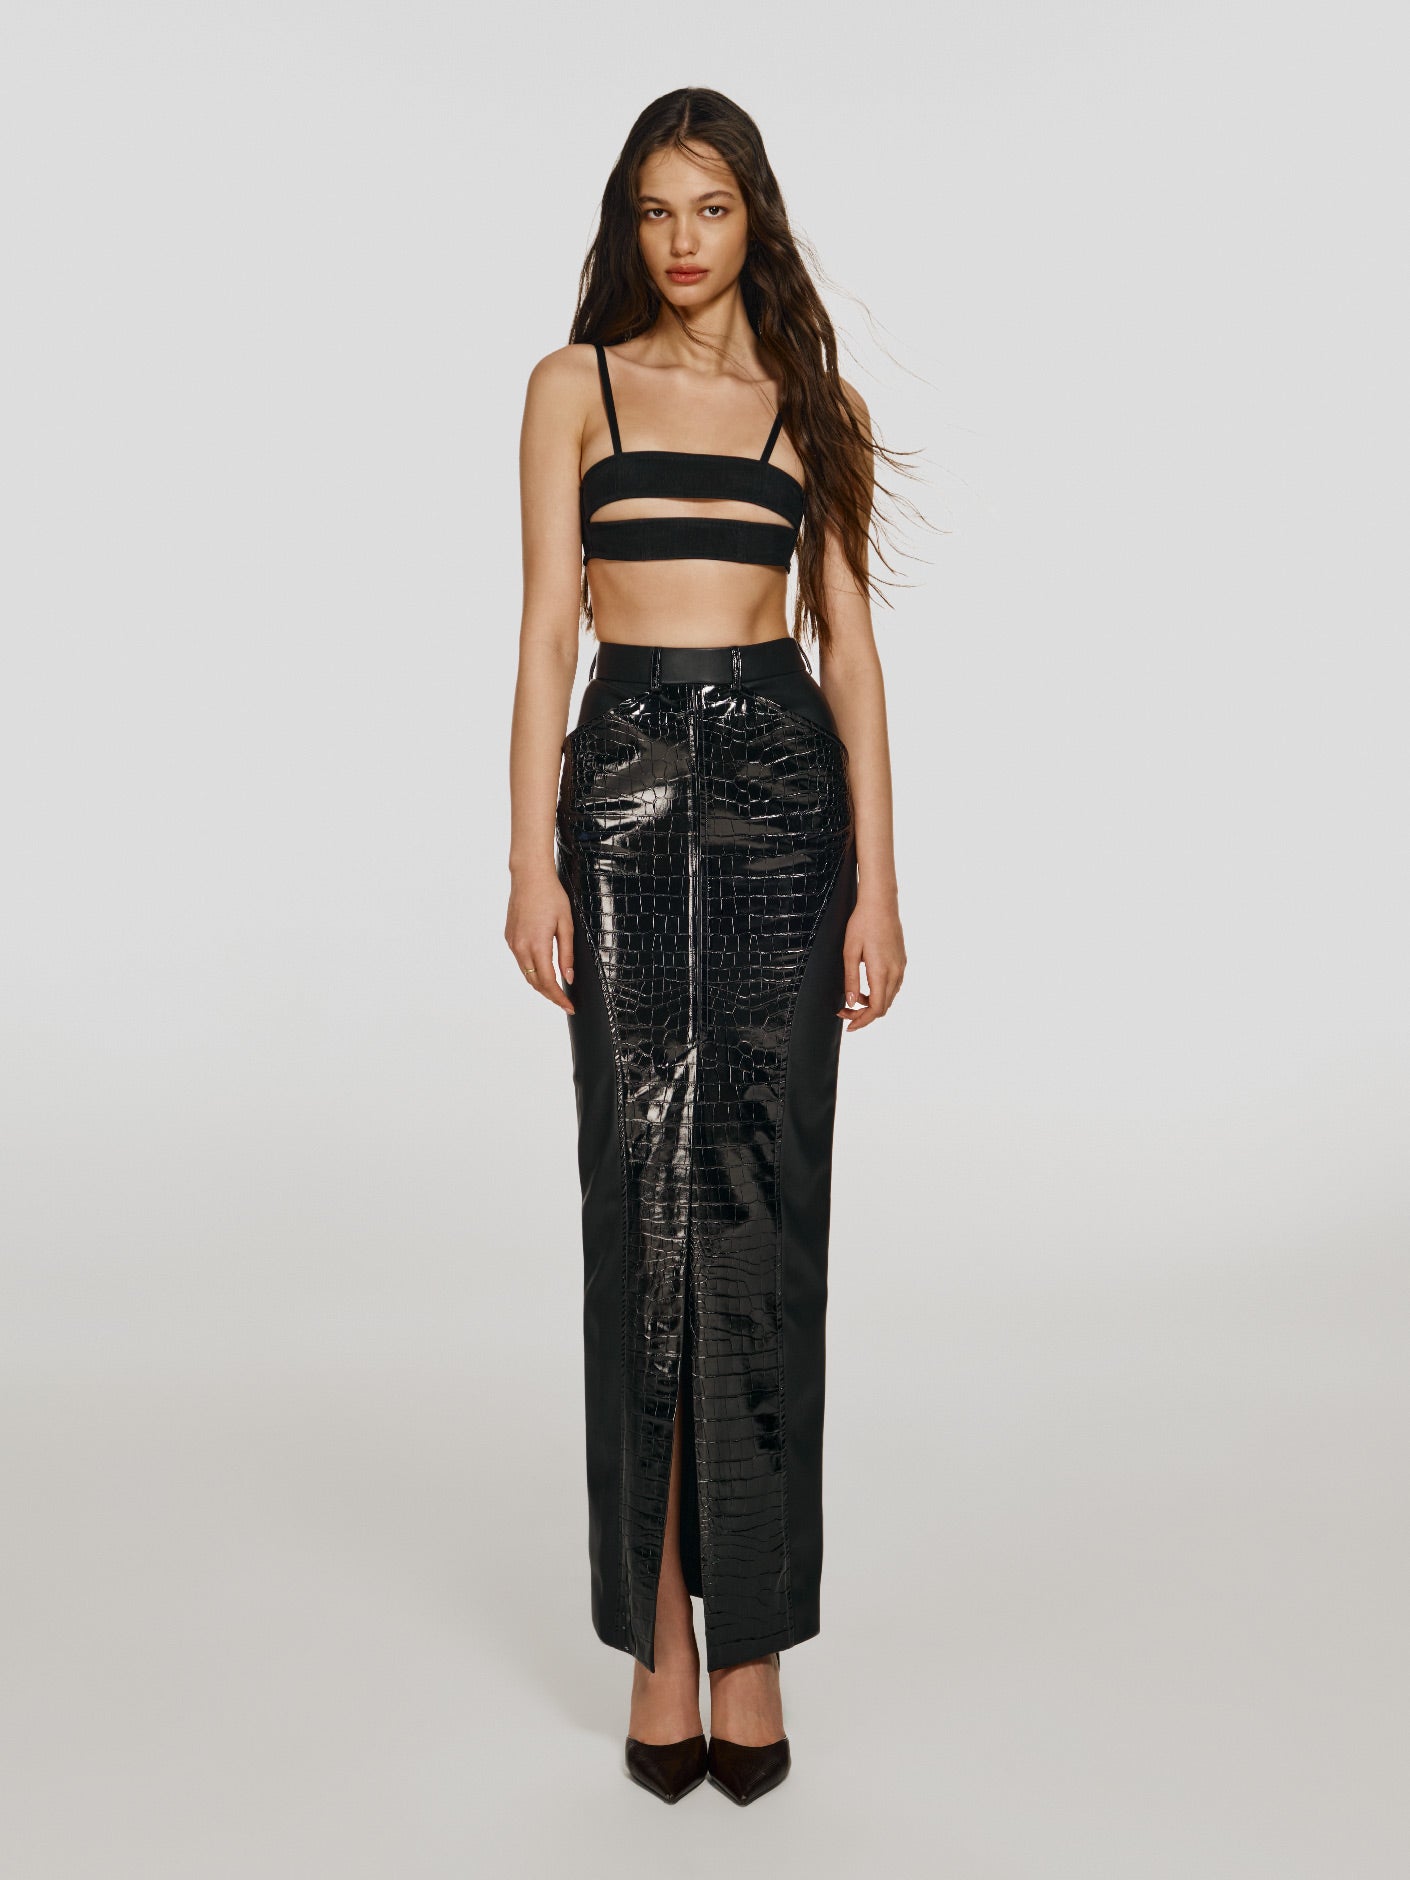 Full shot of a girl in a black mesh crop top with horizontal cut and a black vegan leather maxi skirt with high front slit